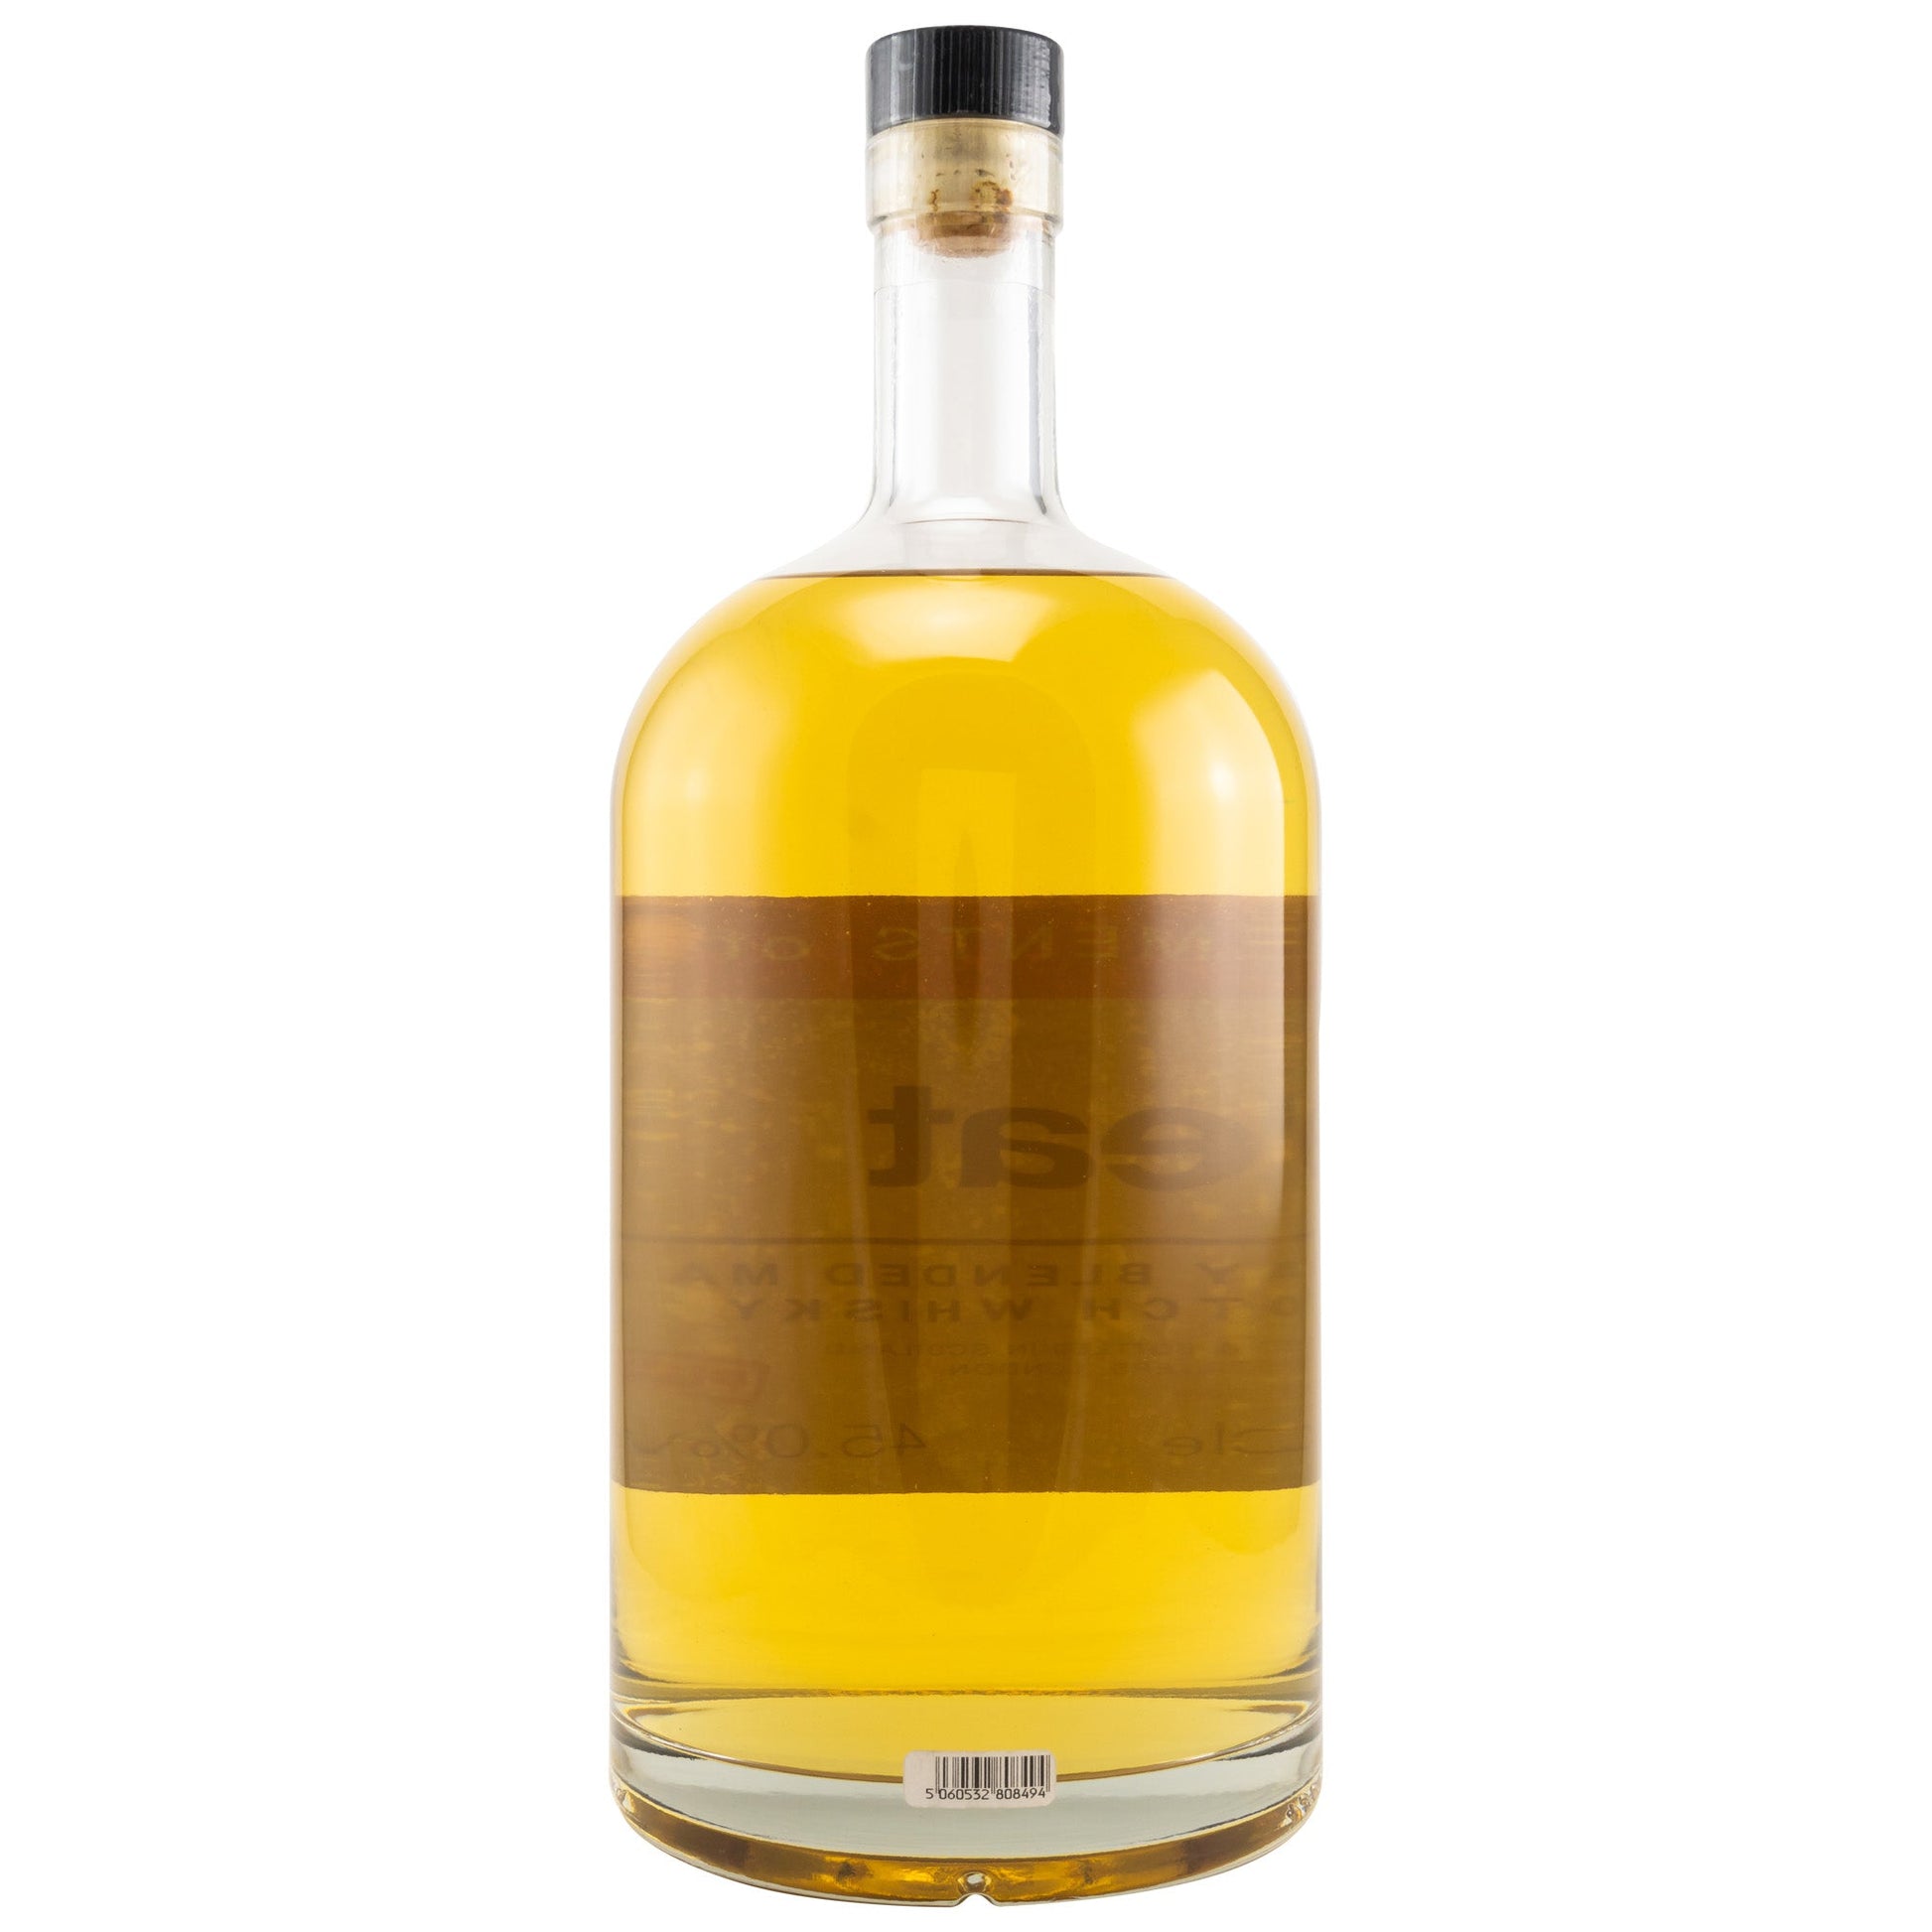 Elixir Distillers | Elements of Islay | Peat Pure Islay | Blended Malt Scotch Whisky | 4,5l | 45%GET A BOTTLE